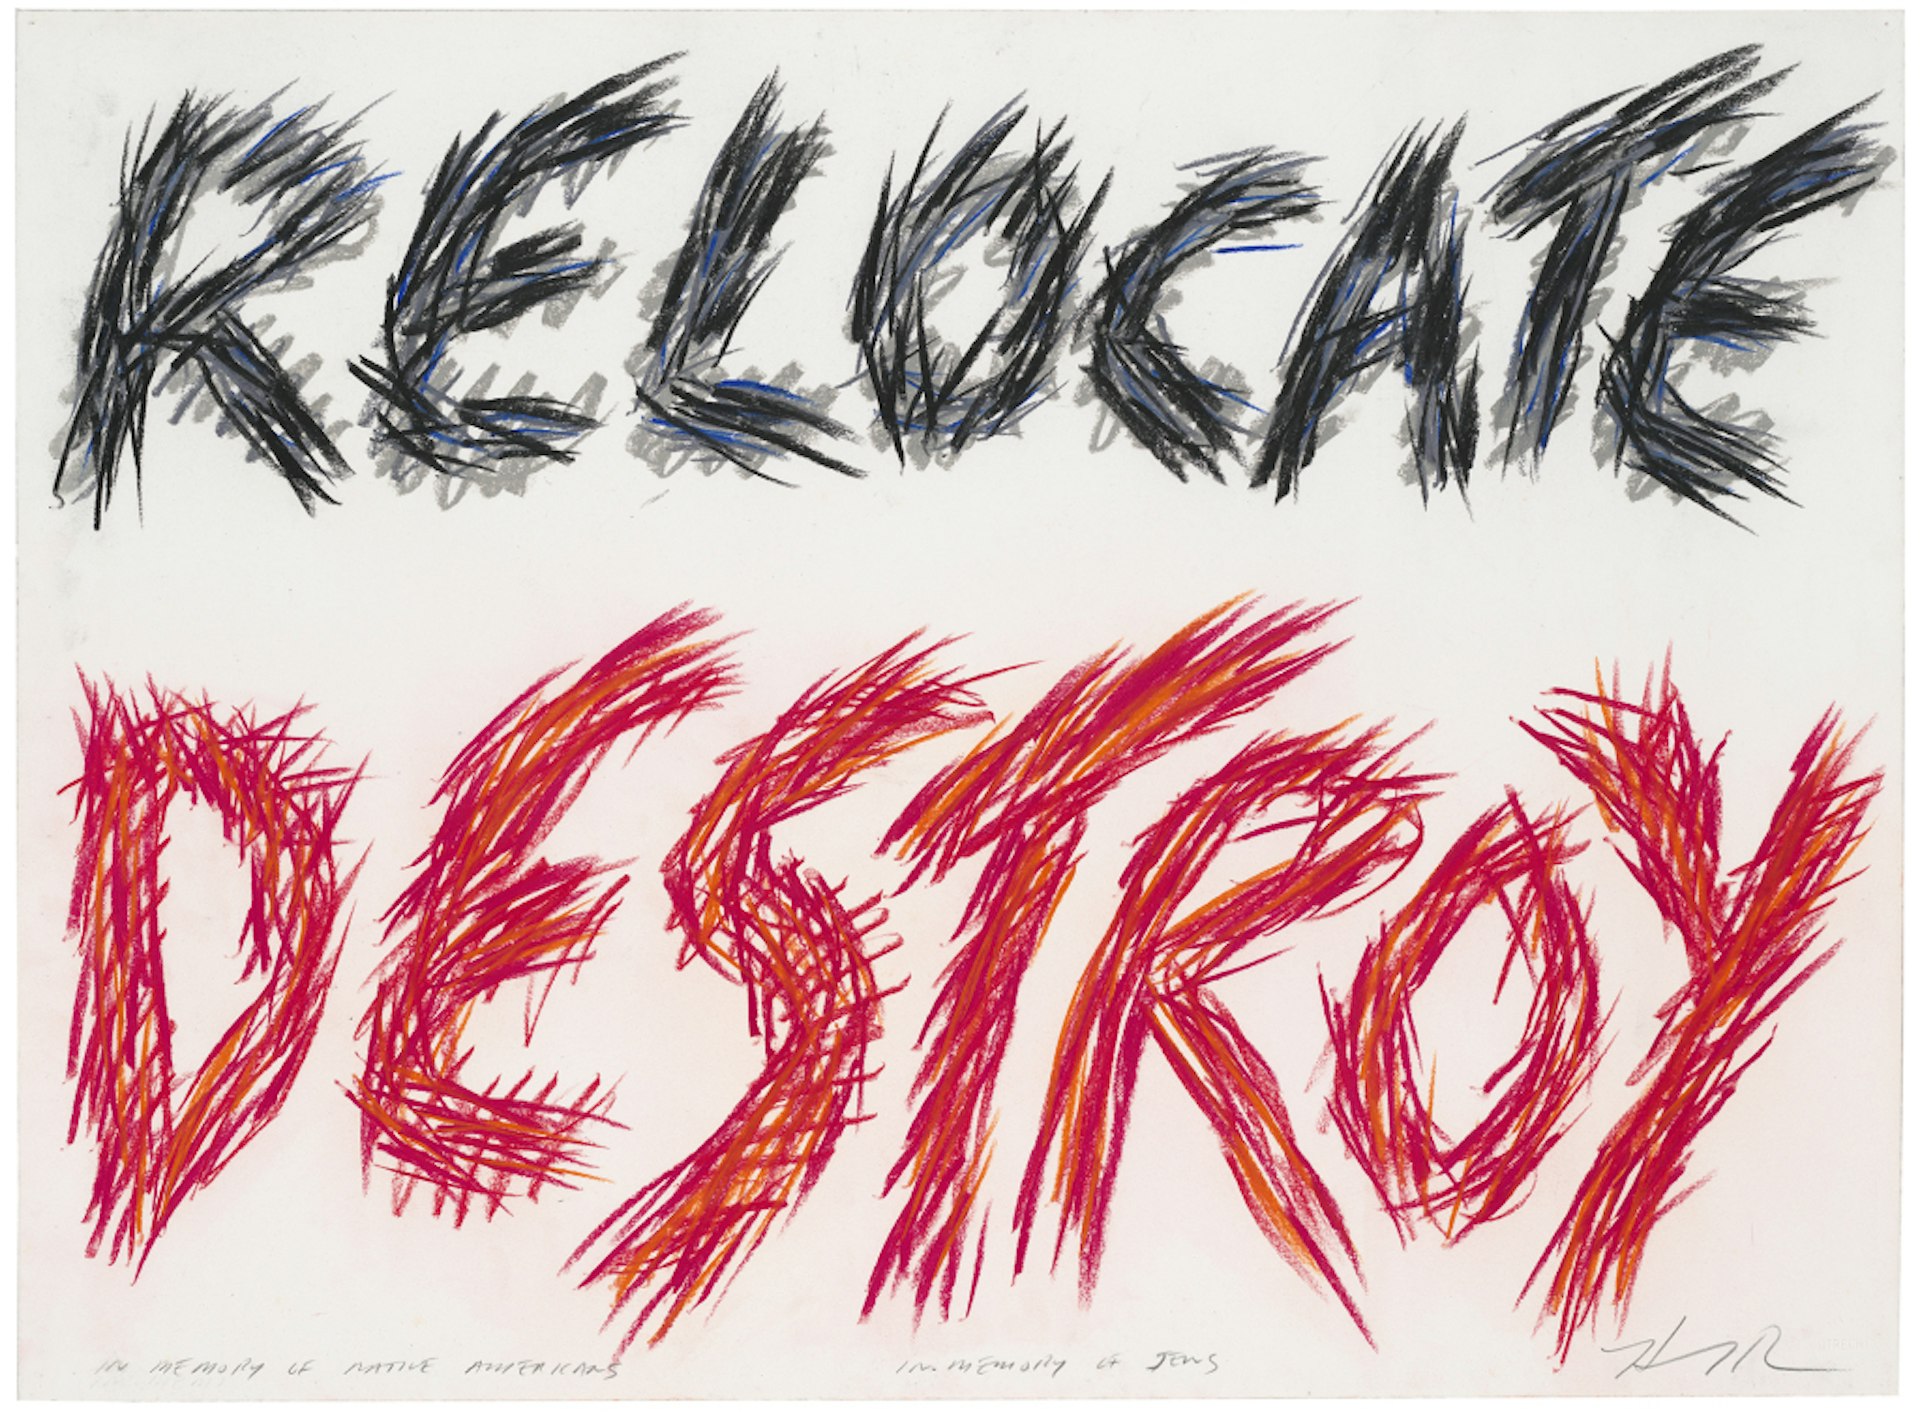 Relocate Destroy, In Memory of Native Americans, In Memory of Jews, 1987, Edgar Heap of Birds. Courtesy the Whitney.